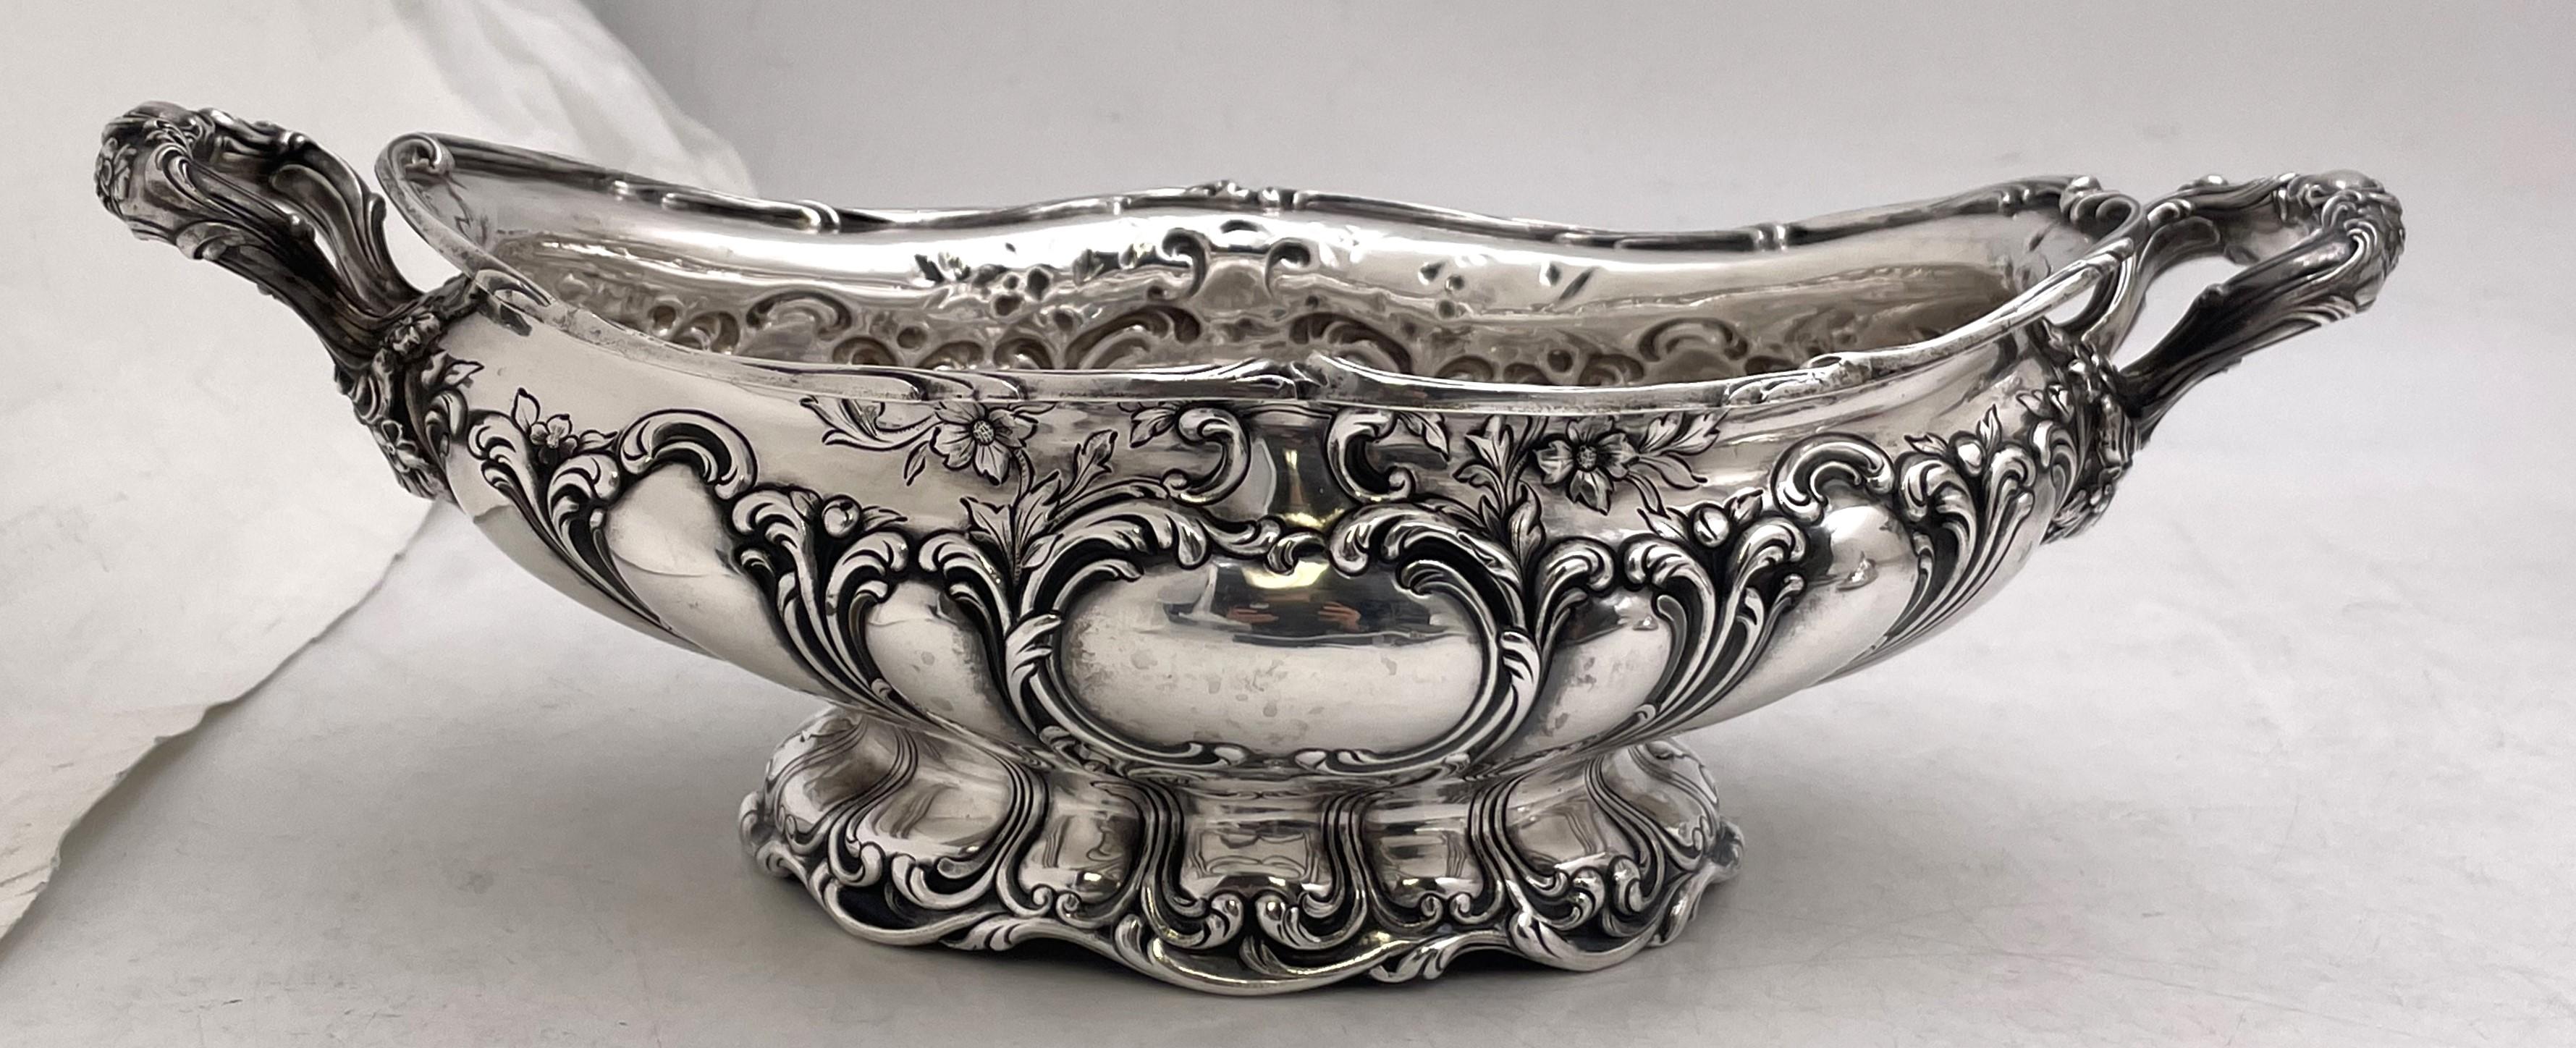 Early 20th Century Gorham Chantilly Grande Pair of Sterling Silver 1900 Tureens Art Nouveau Style